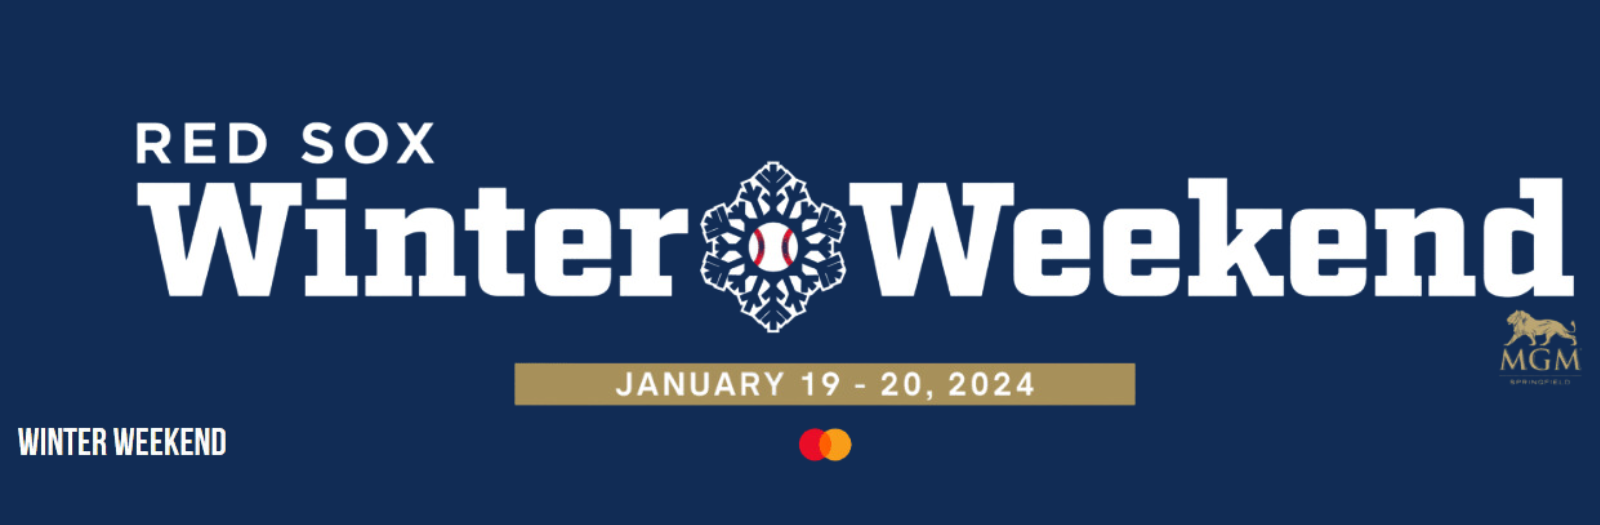 Red Sox Winter Weekend 